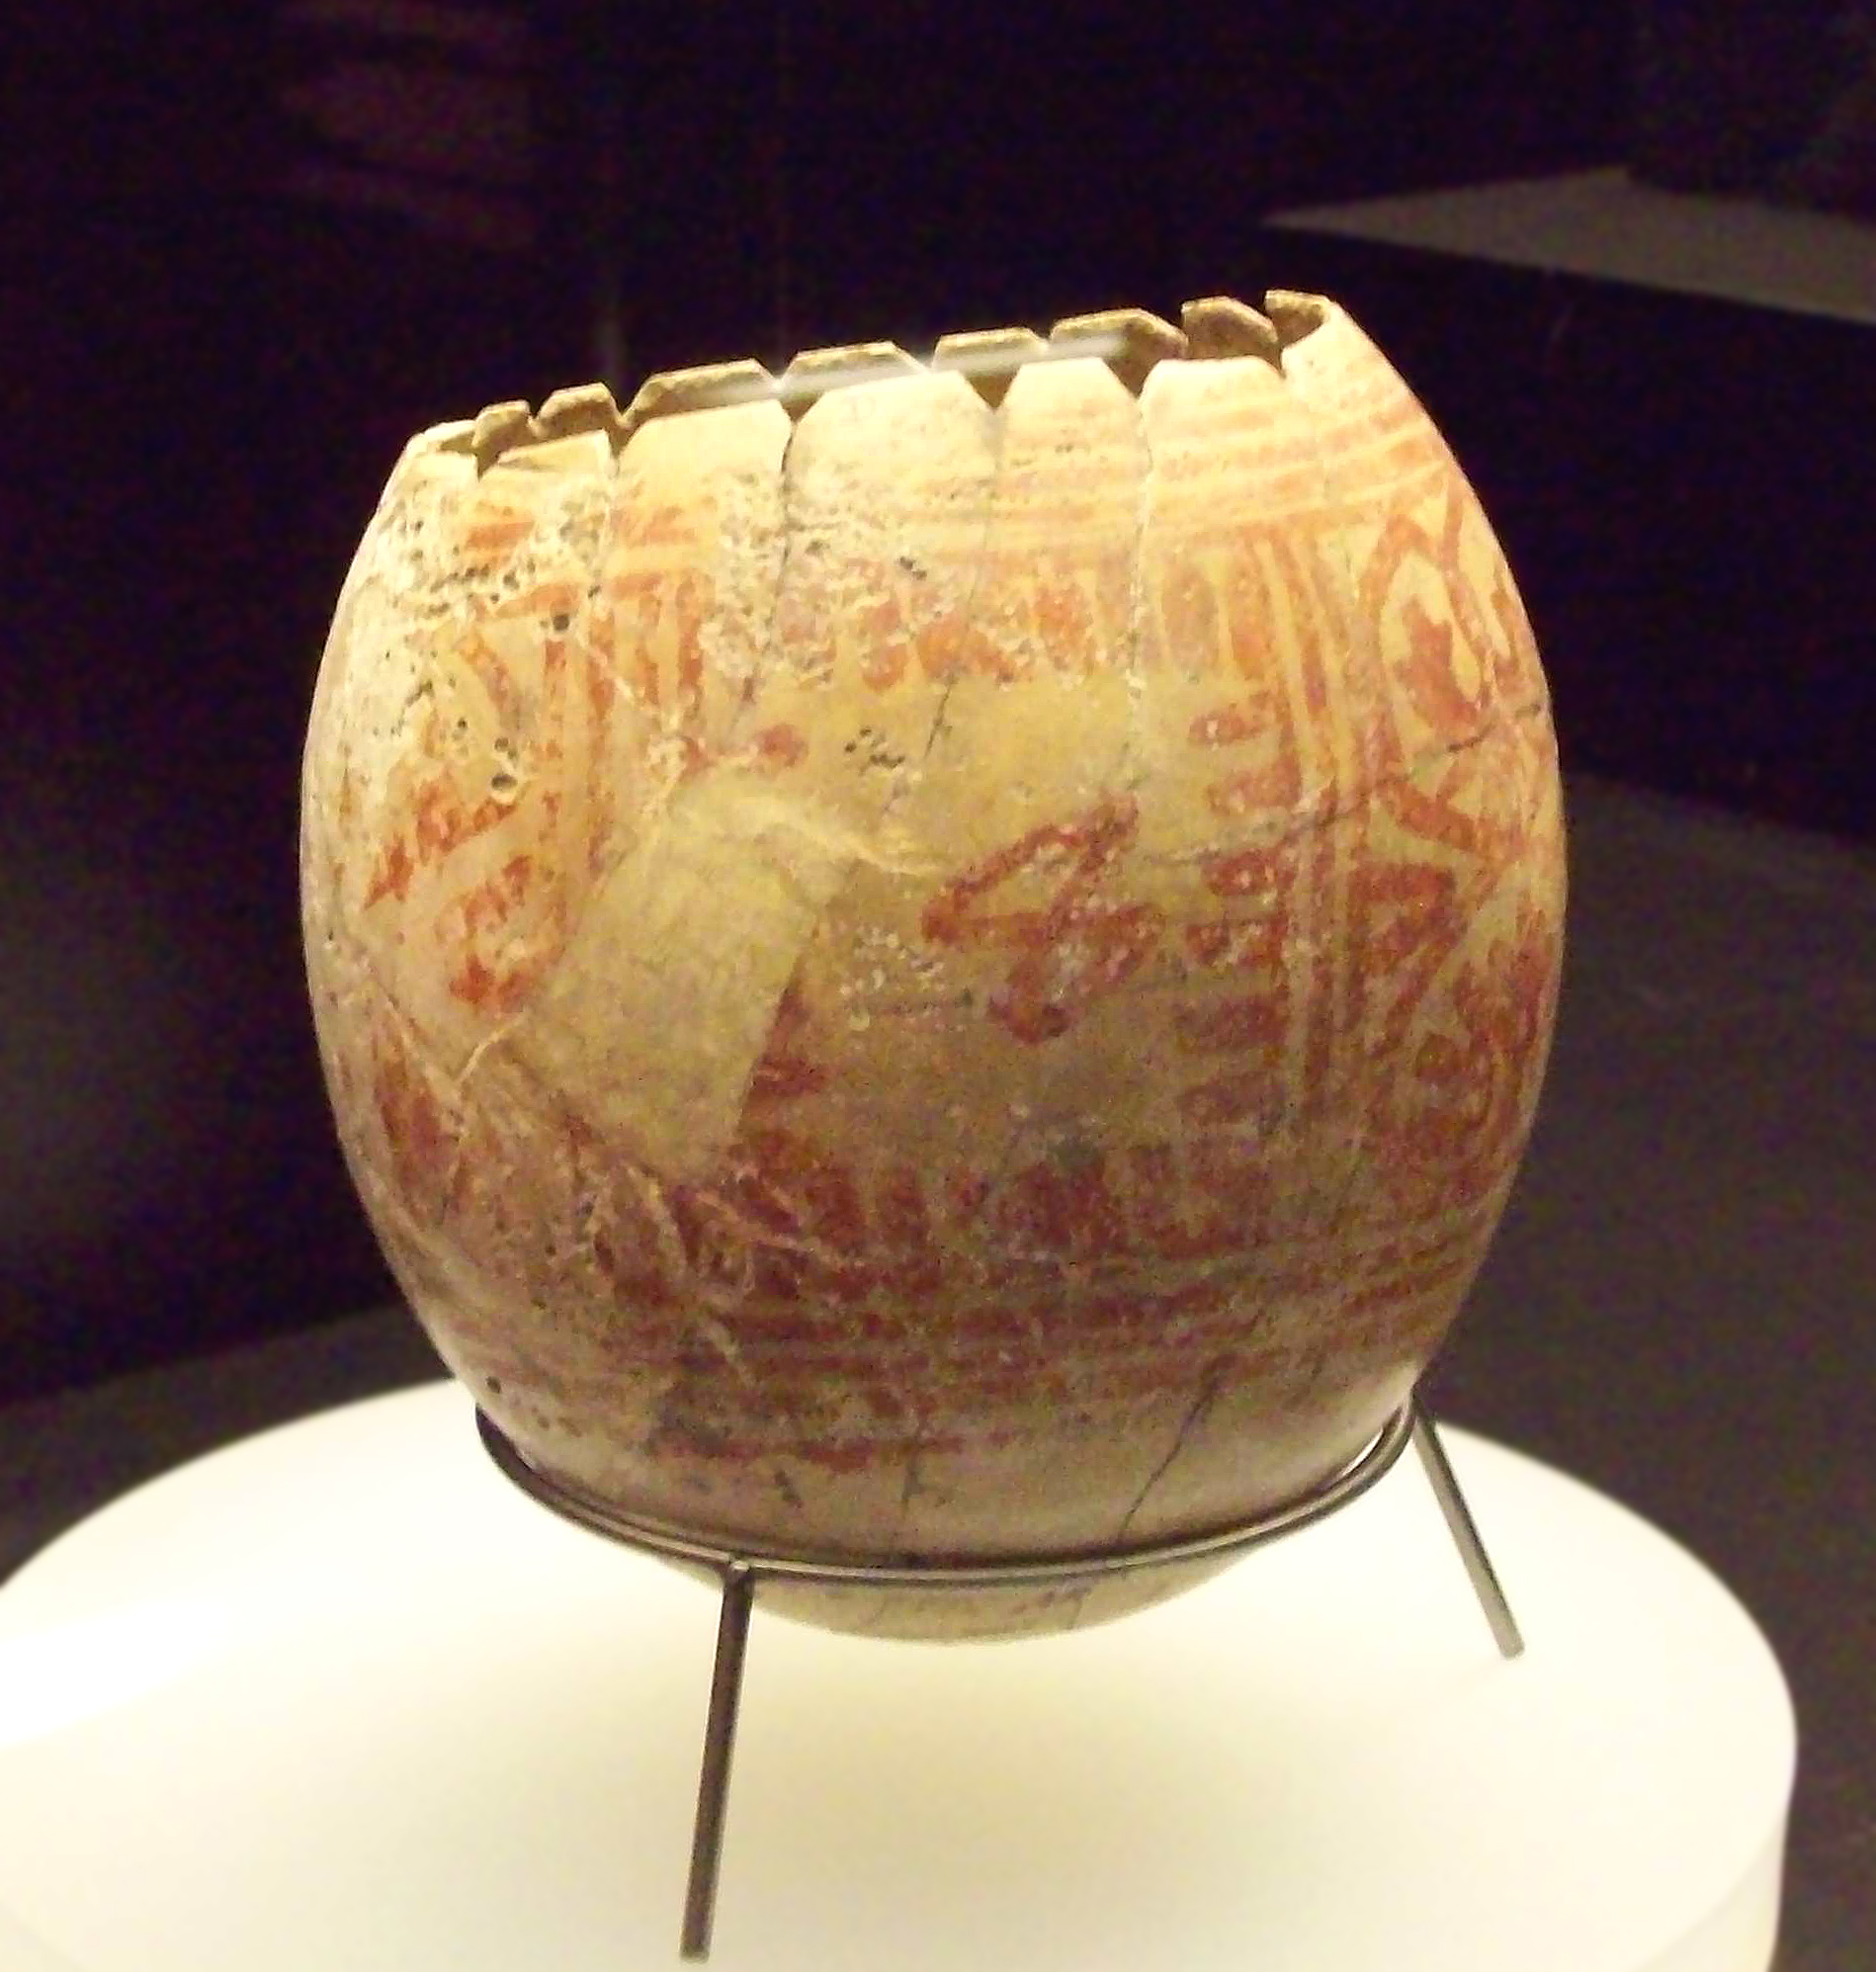 An ostrich egg decorated with Punic artwork, discovered in Andalusia, Spain and dating from between 599 and 300 BC (By Luis García, CC BY-SA 3.0, https://commons.wikimedia.org/w/index.php?curid=6445410)